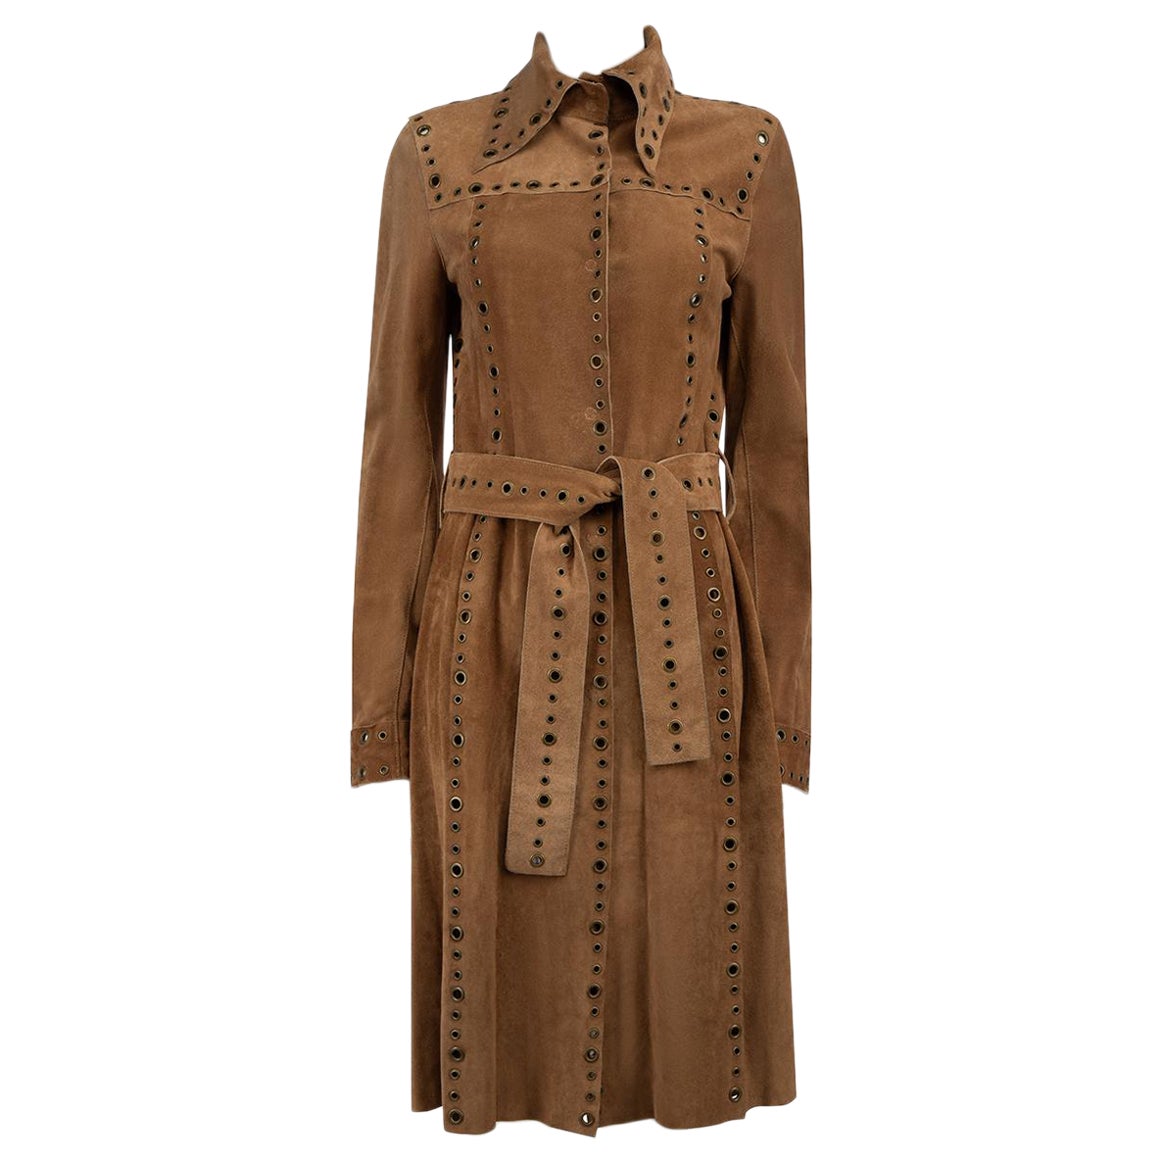 Dolce & Gabbana Brown Suede Eyelet Belted Coat Size S